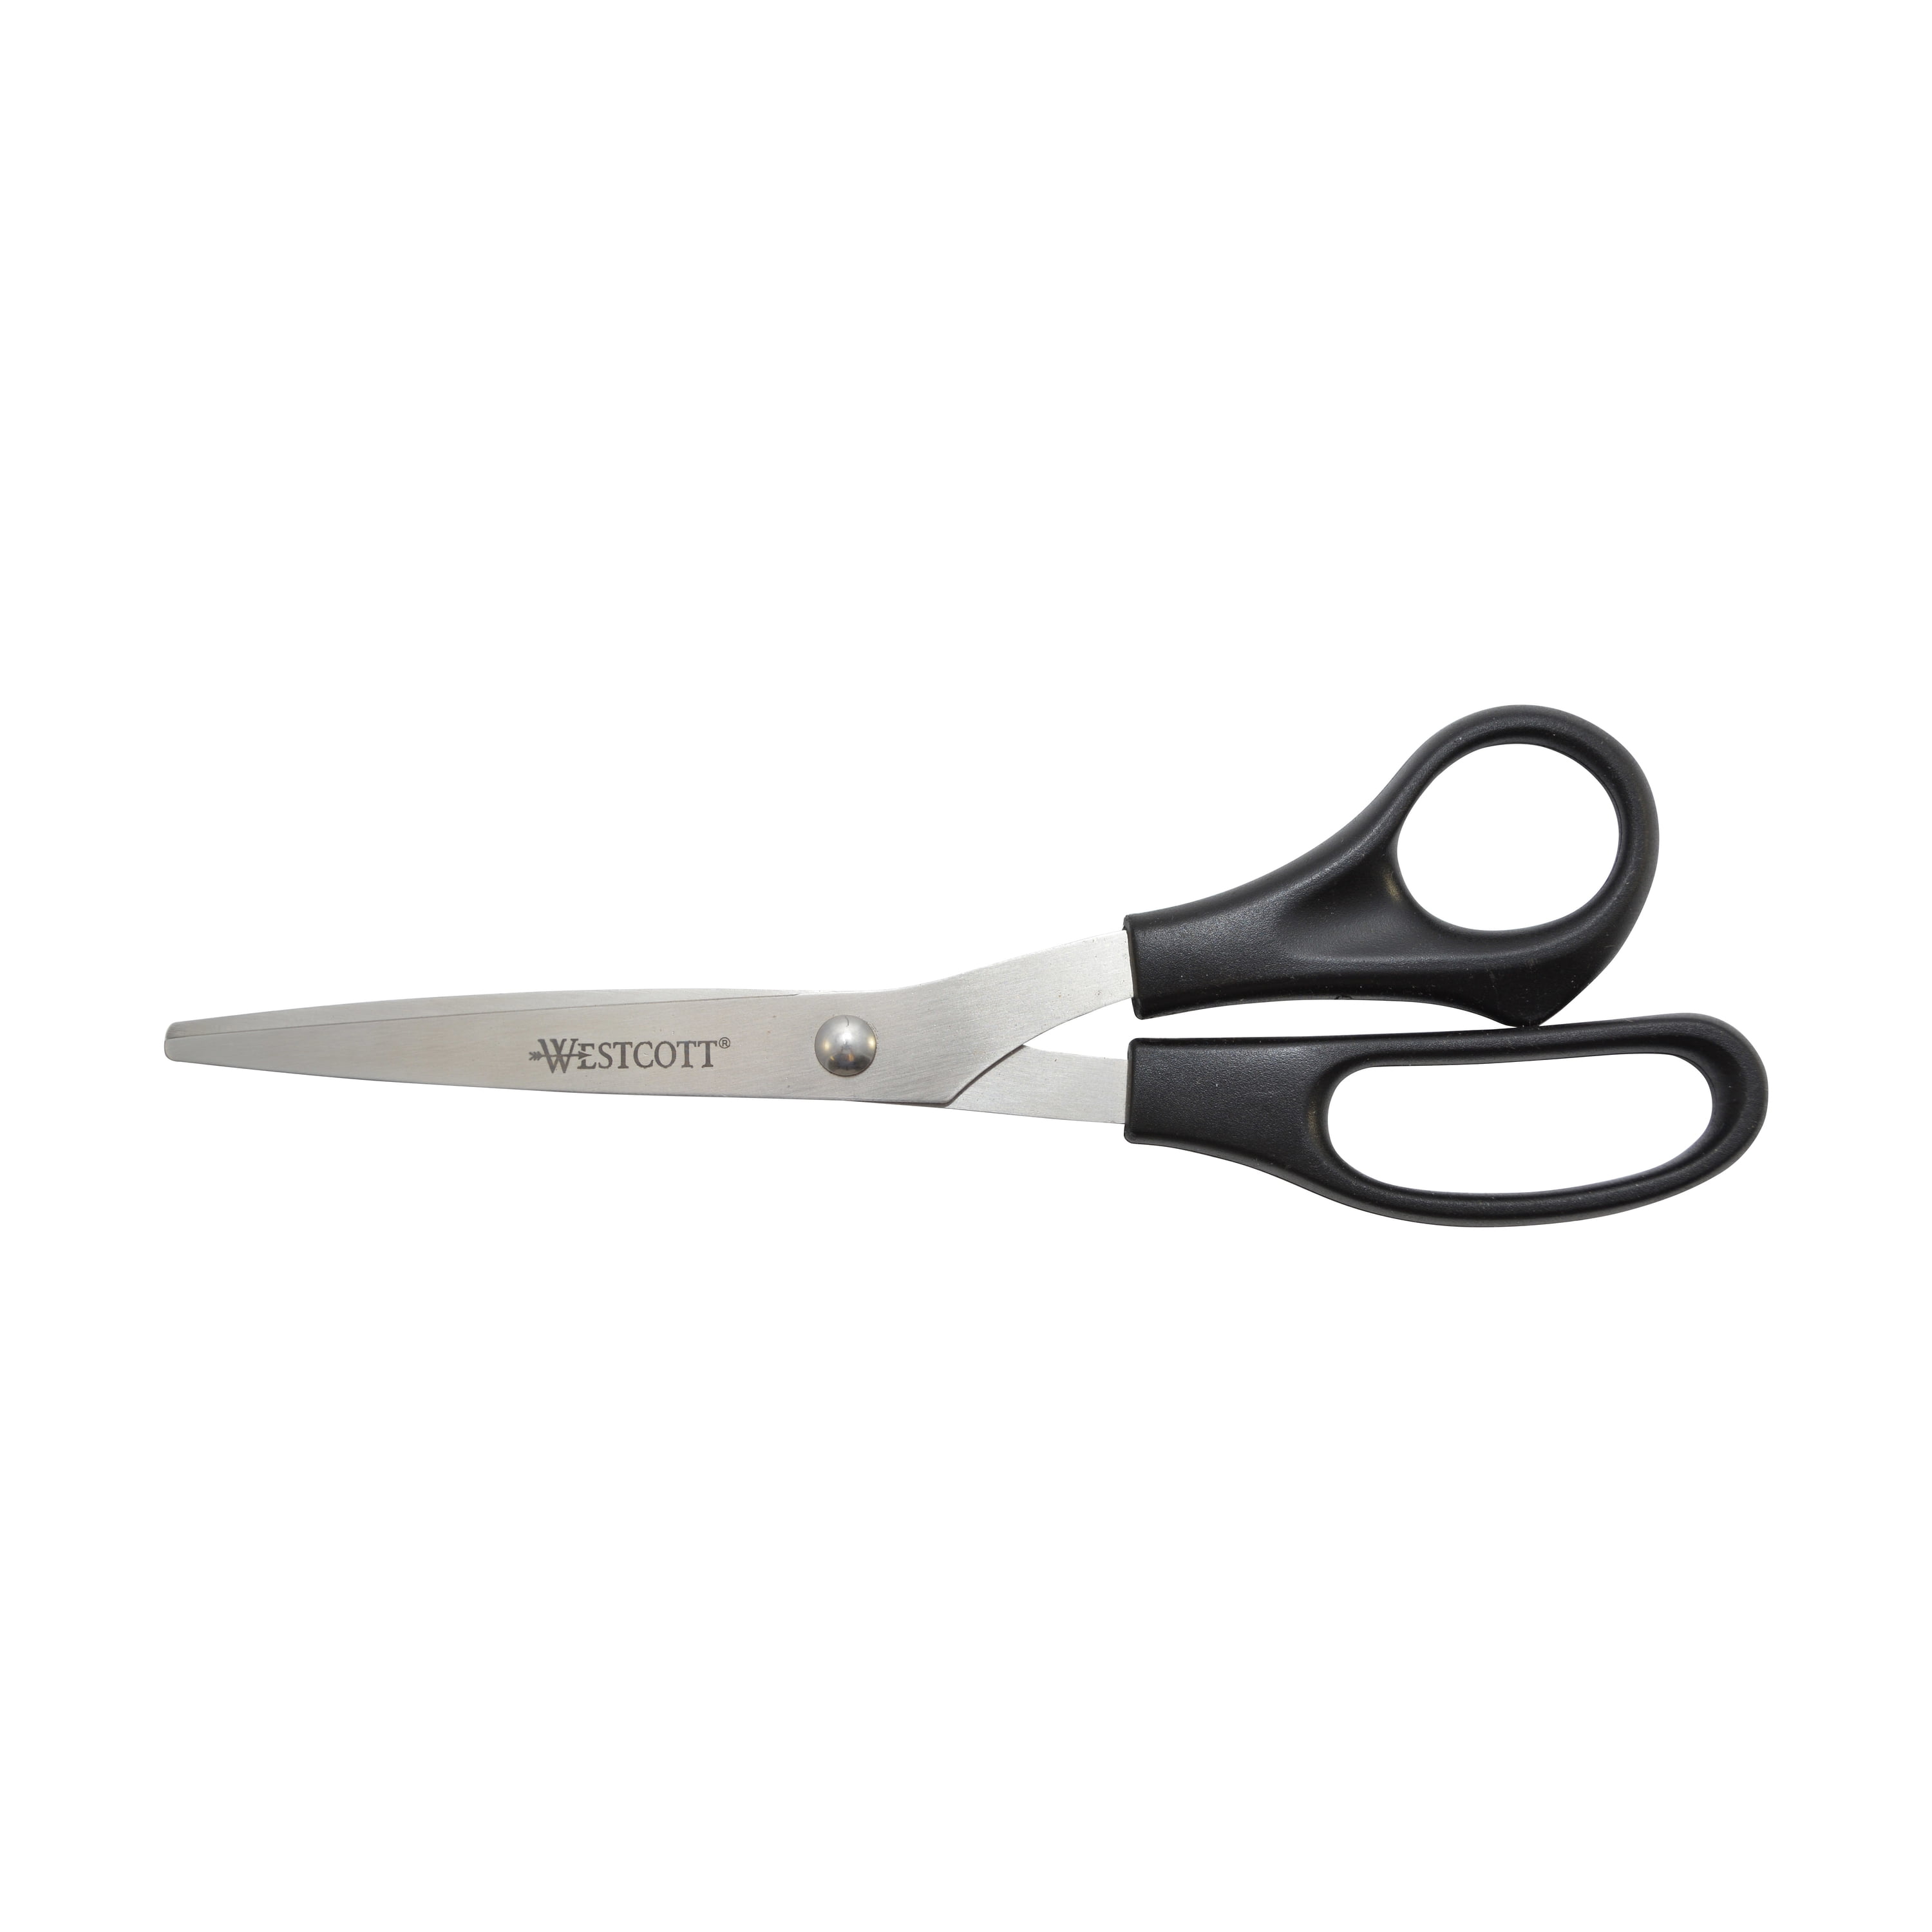  Westcott Forged Nickel Plated Straight Office Scissors, 6,  Black : Toys & Games